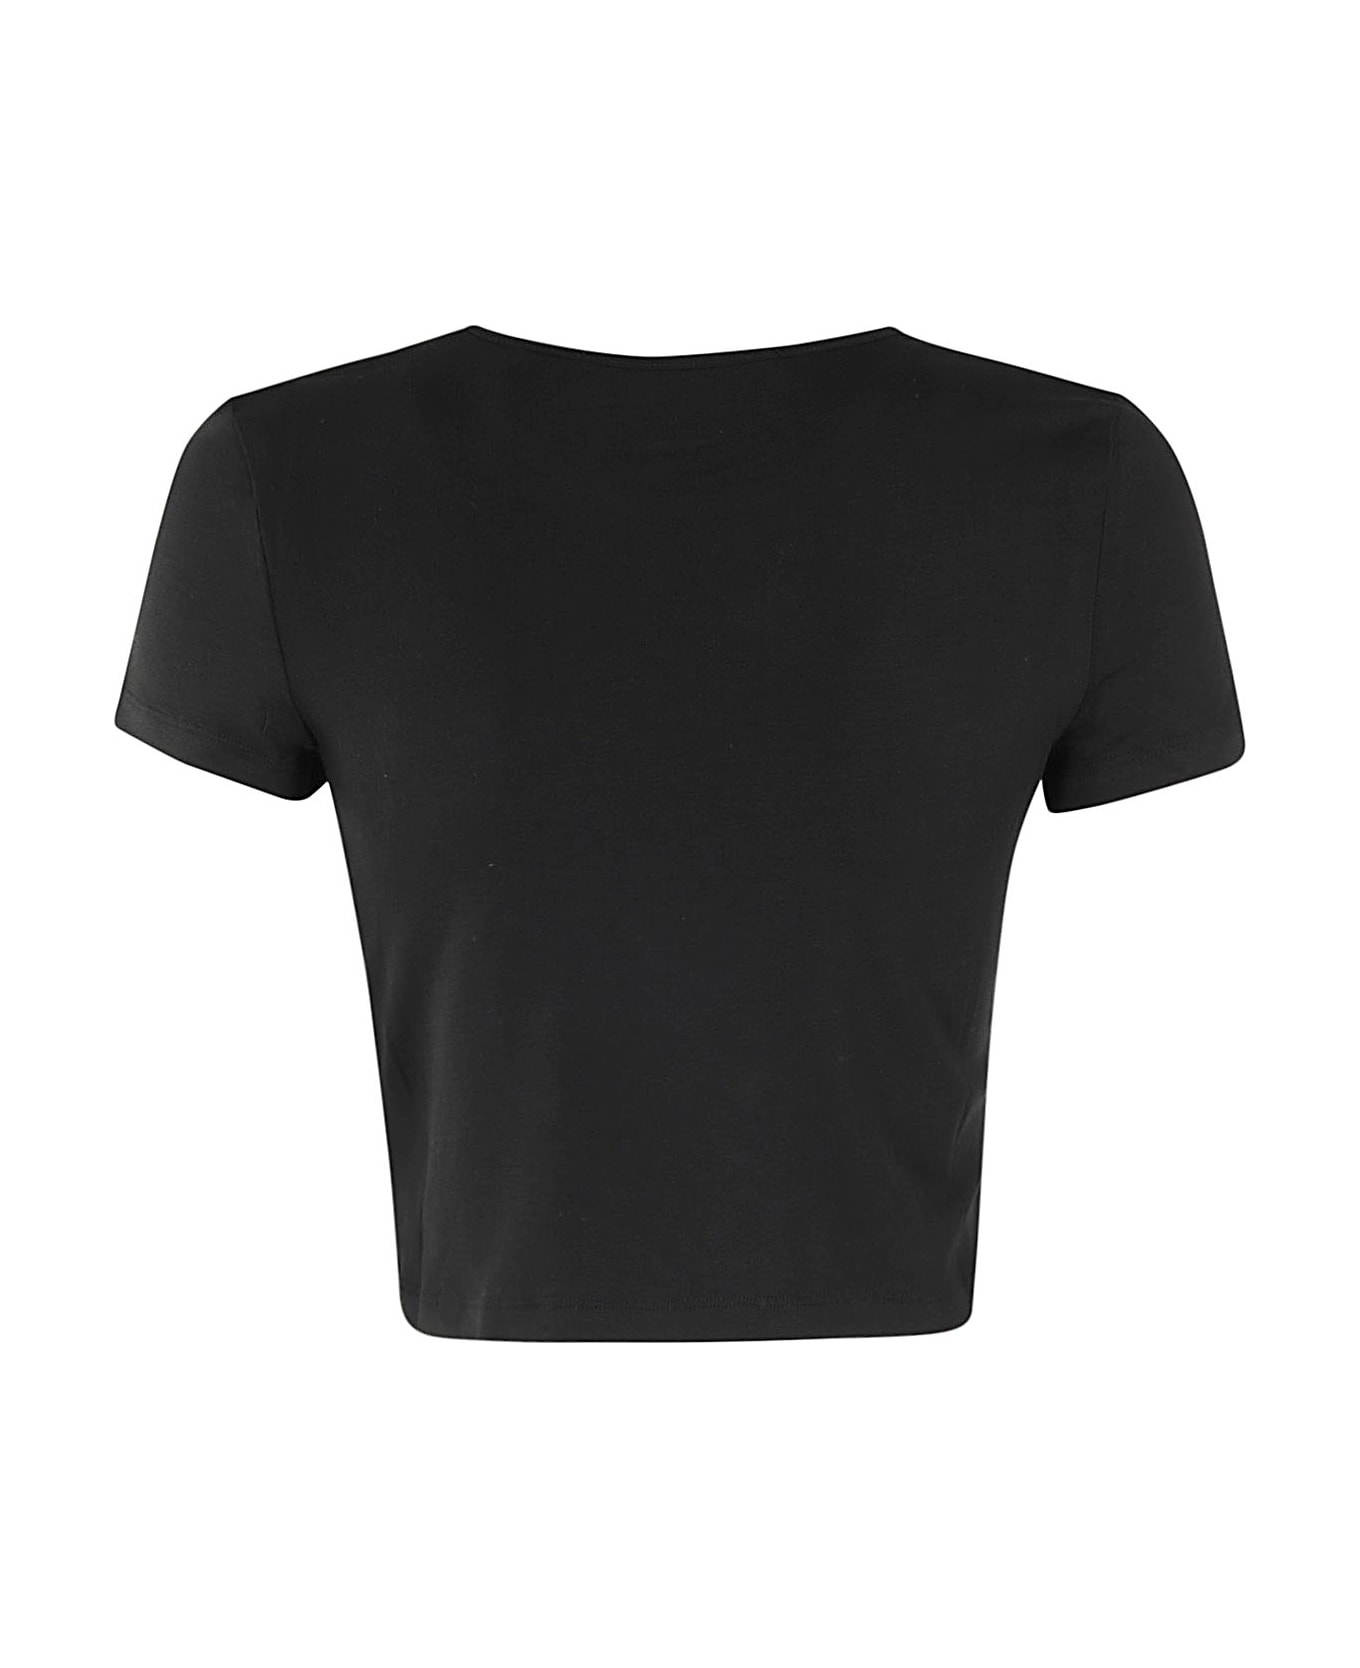 Rotate by Birger Christensen Cropped Tシャツ